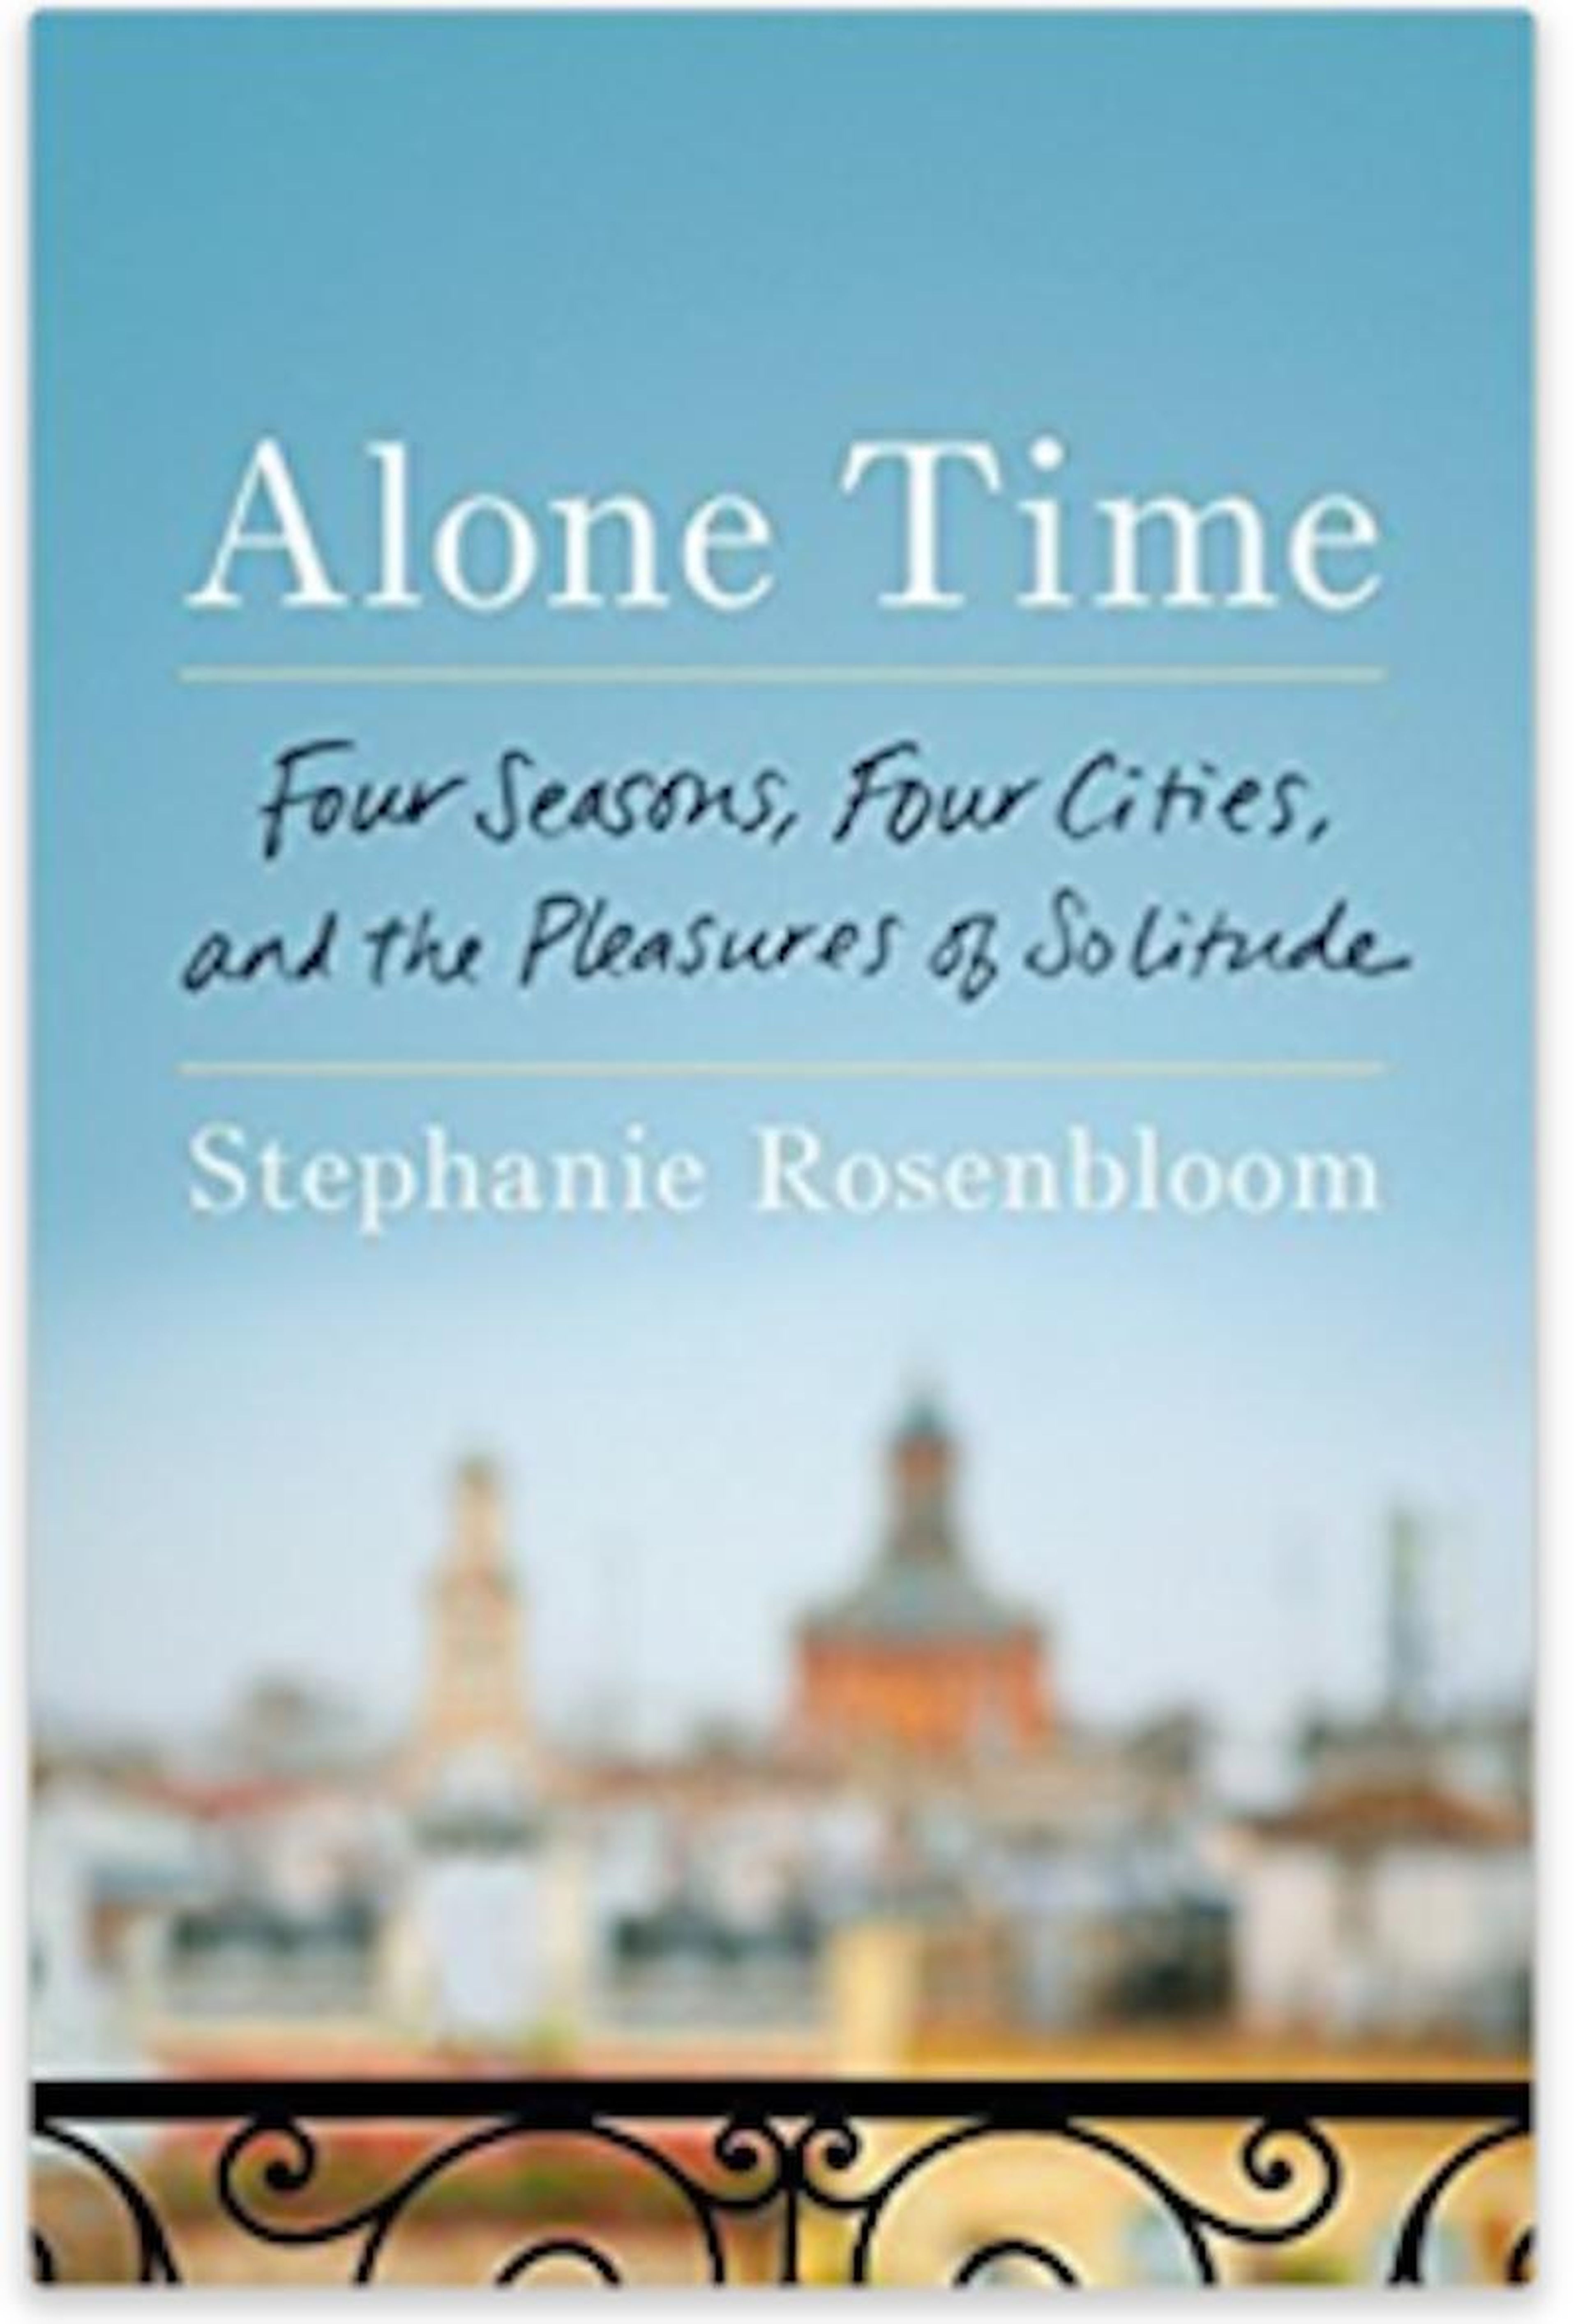 Alone Time: Four Seasons, Four Cities, and the Pleasure of Solitude